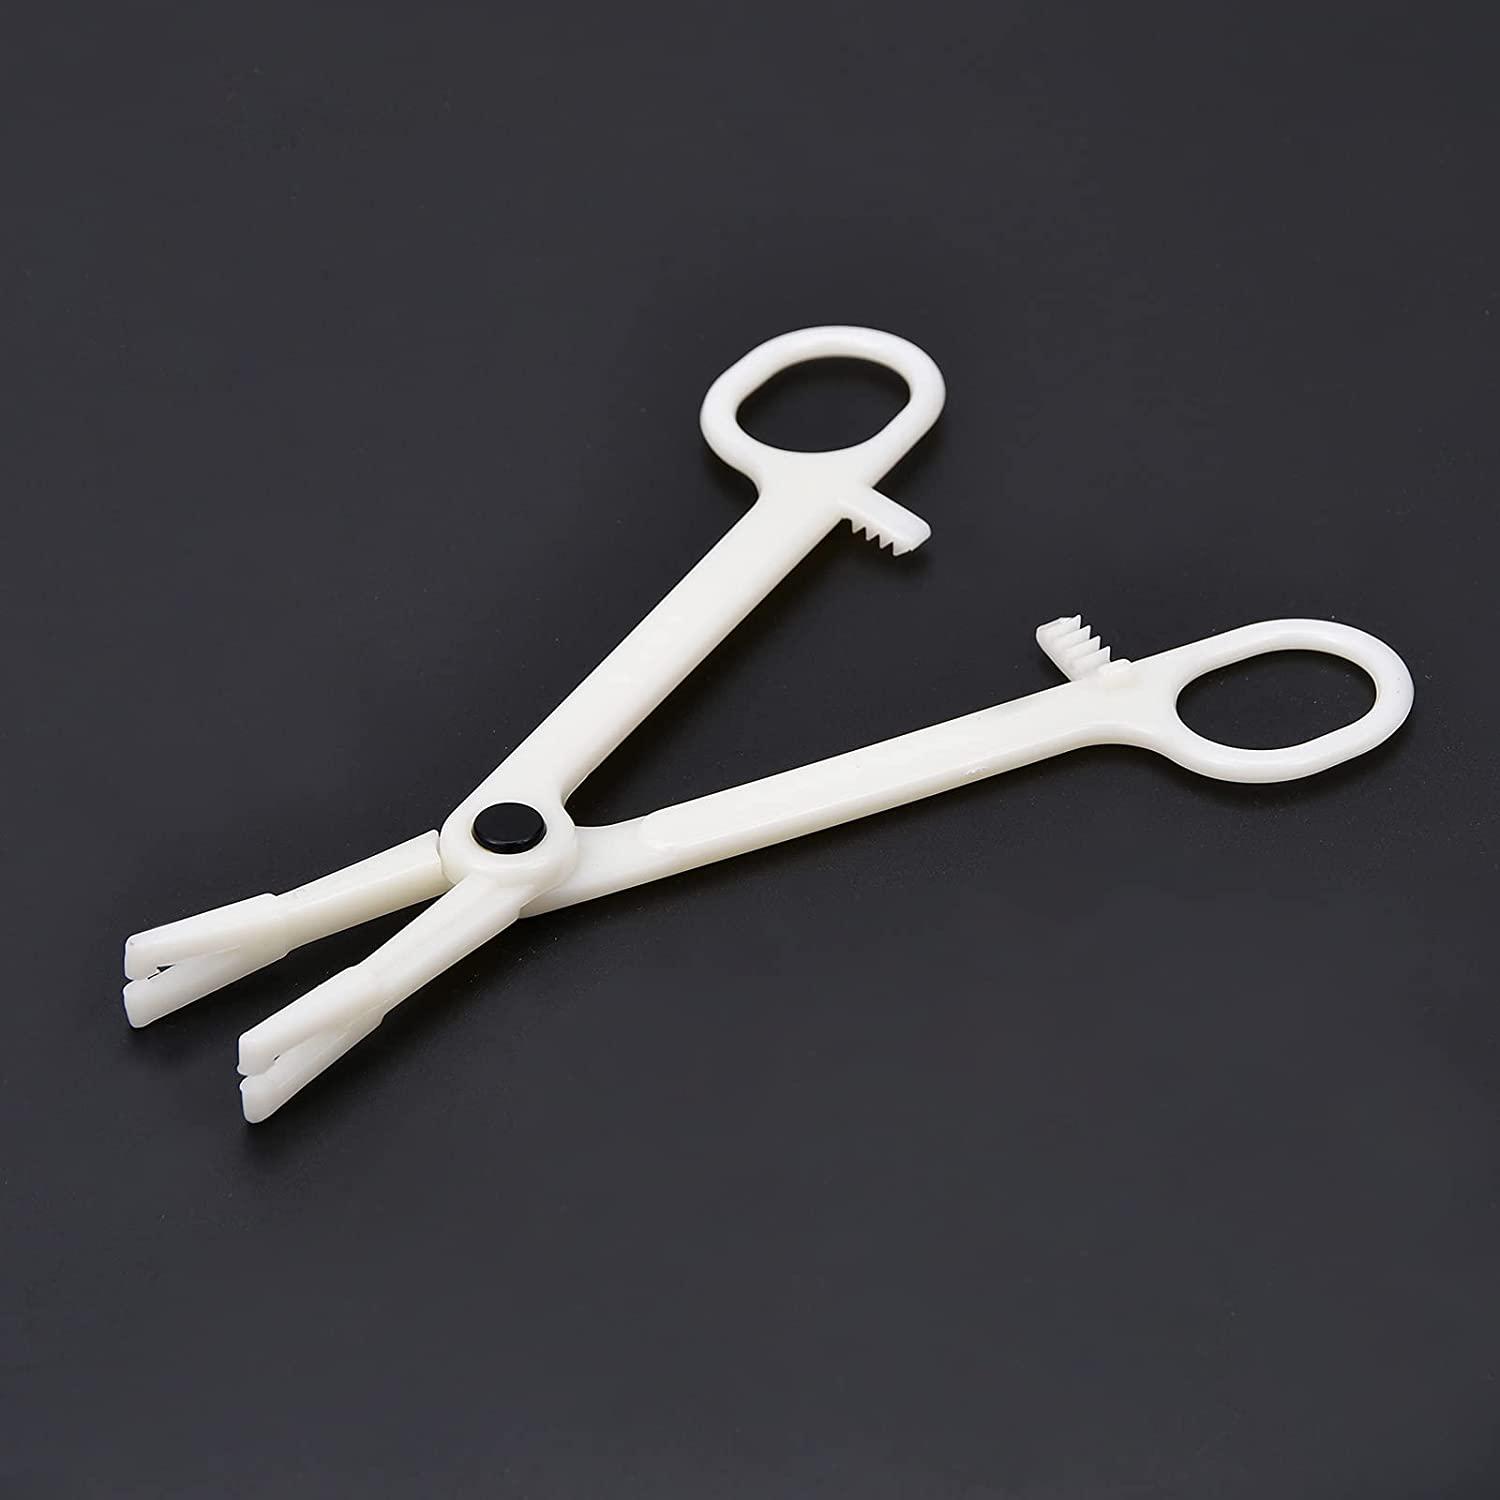 16pcs Belly Button Piercing Kit14g Body Piercing Needles And Disposable Piercing Clamps Set For 